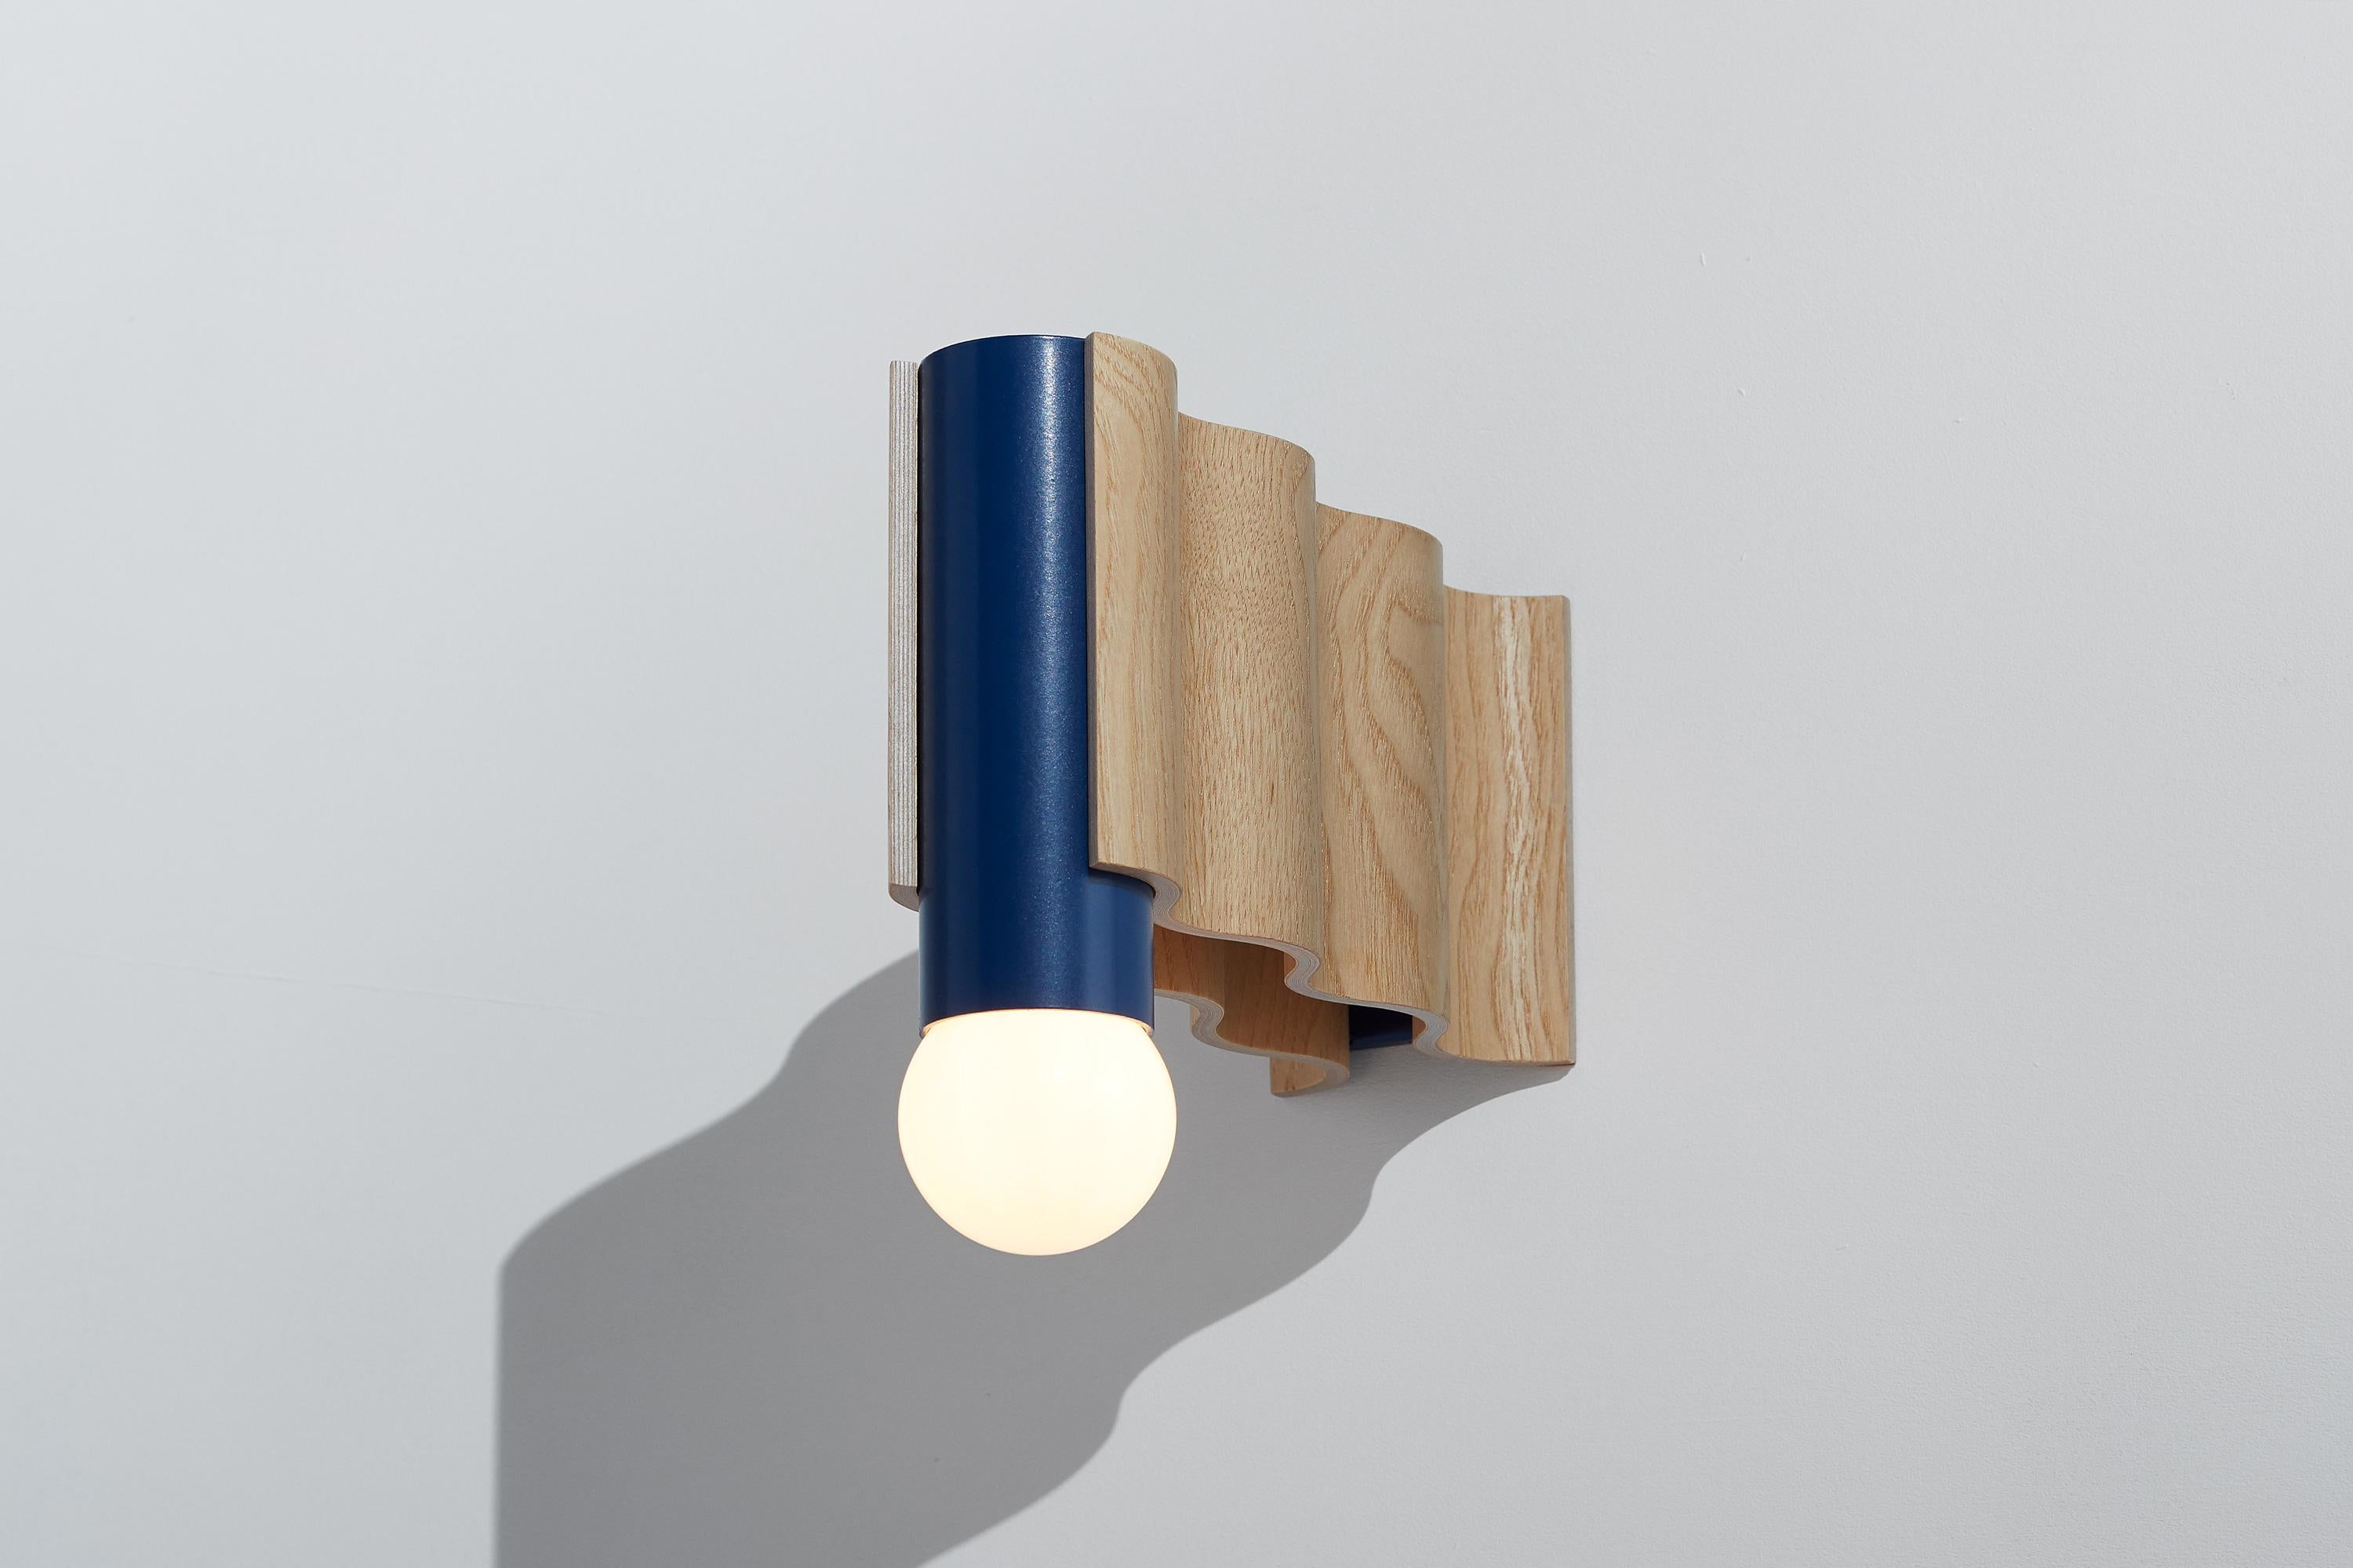 Short Single Corrugation Sconce / Wall Light in Sapphire Blue In New Condition For Sale In London, GB